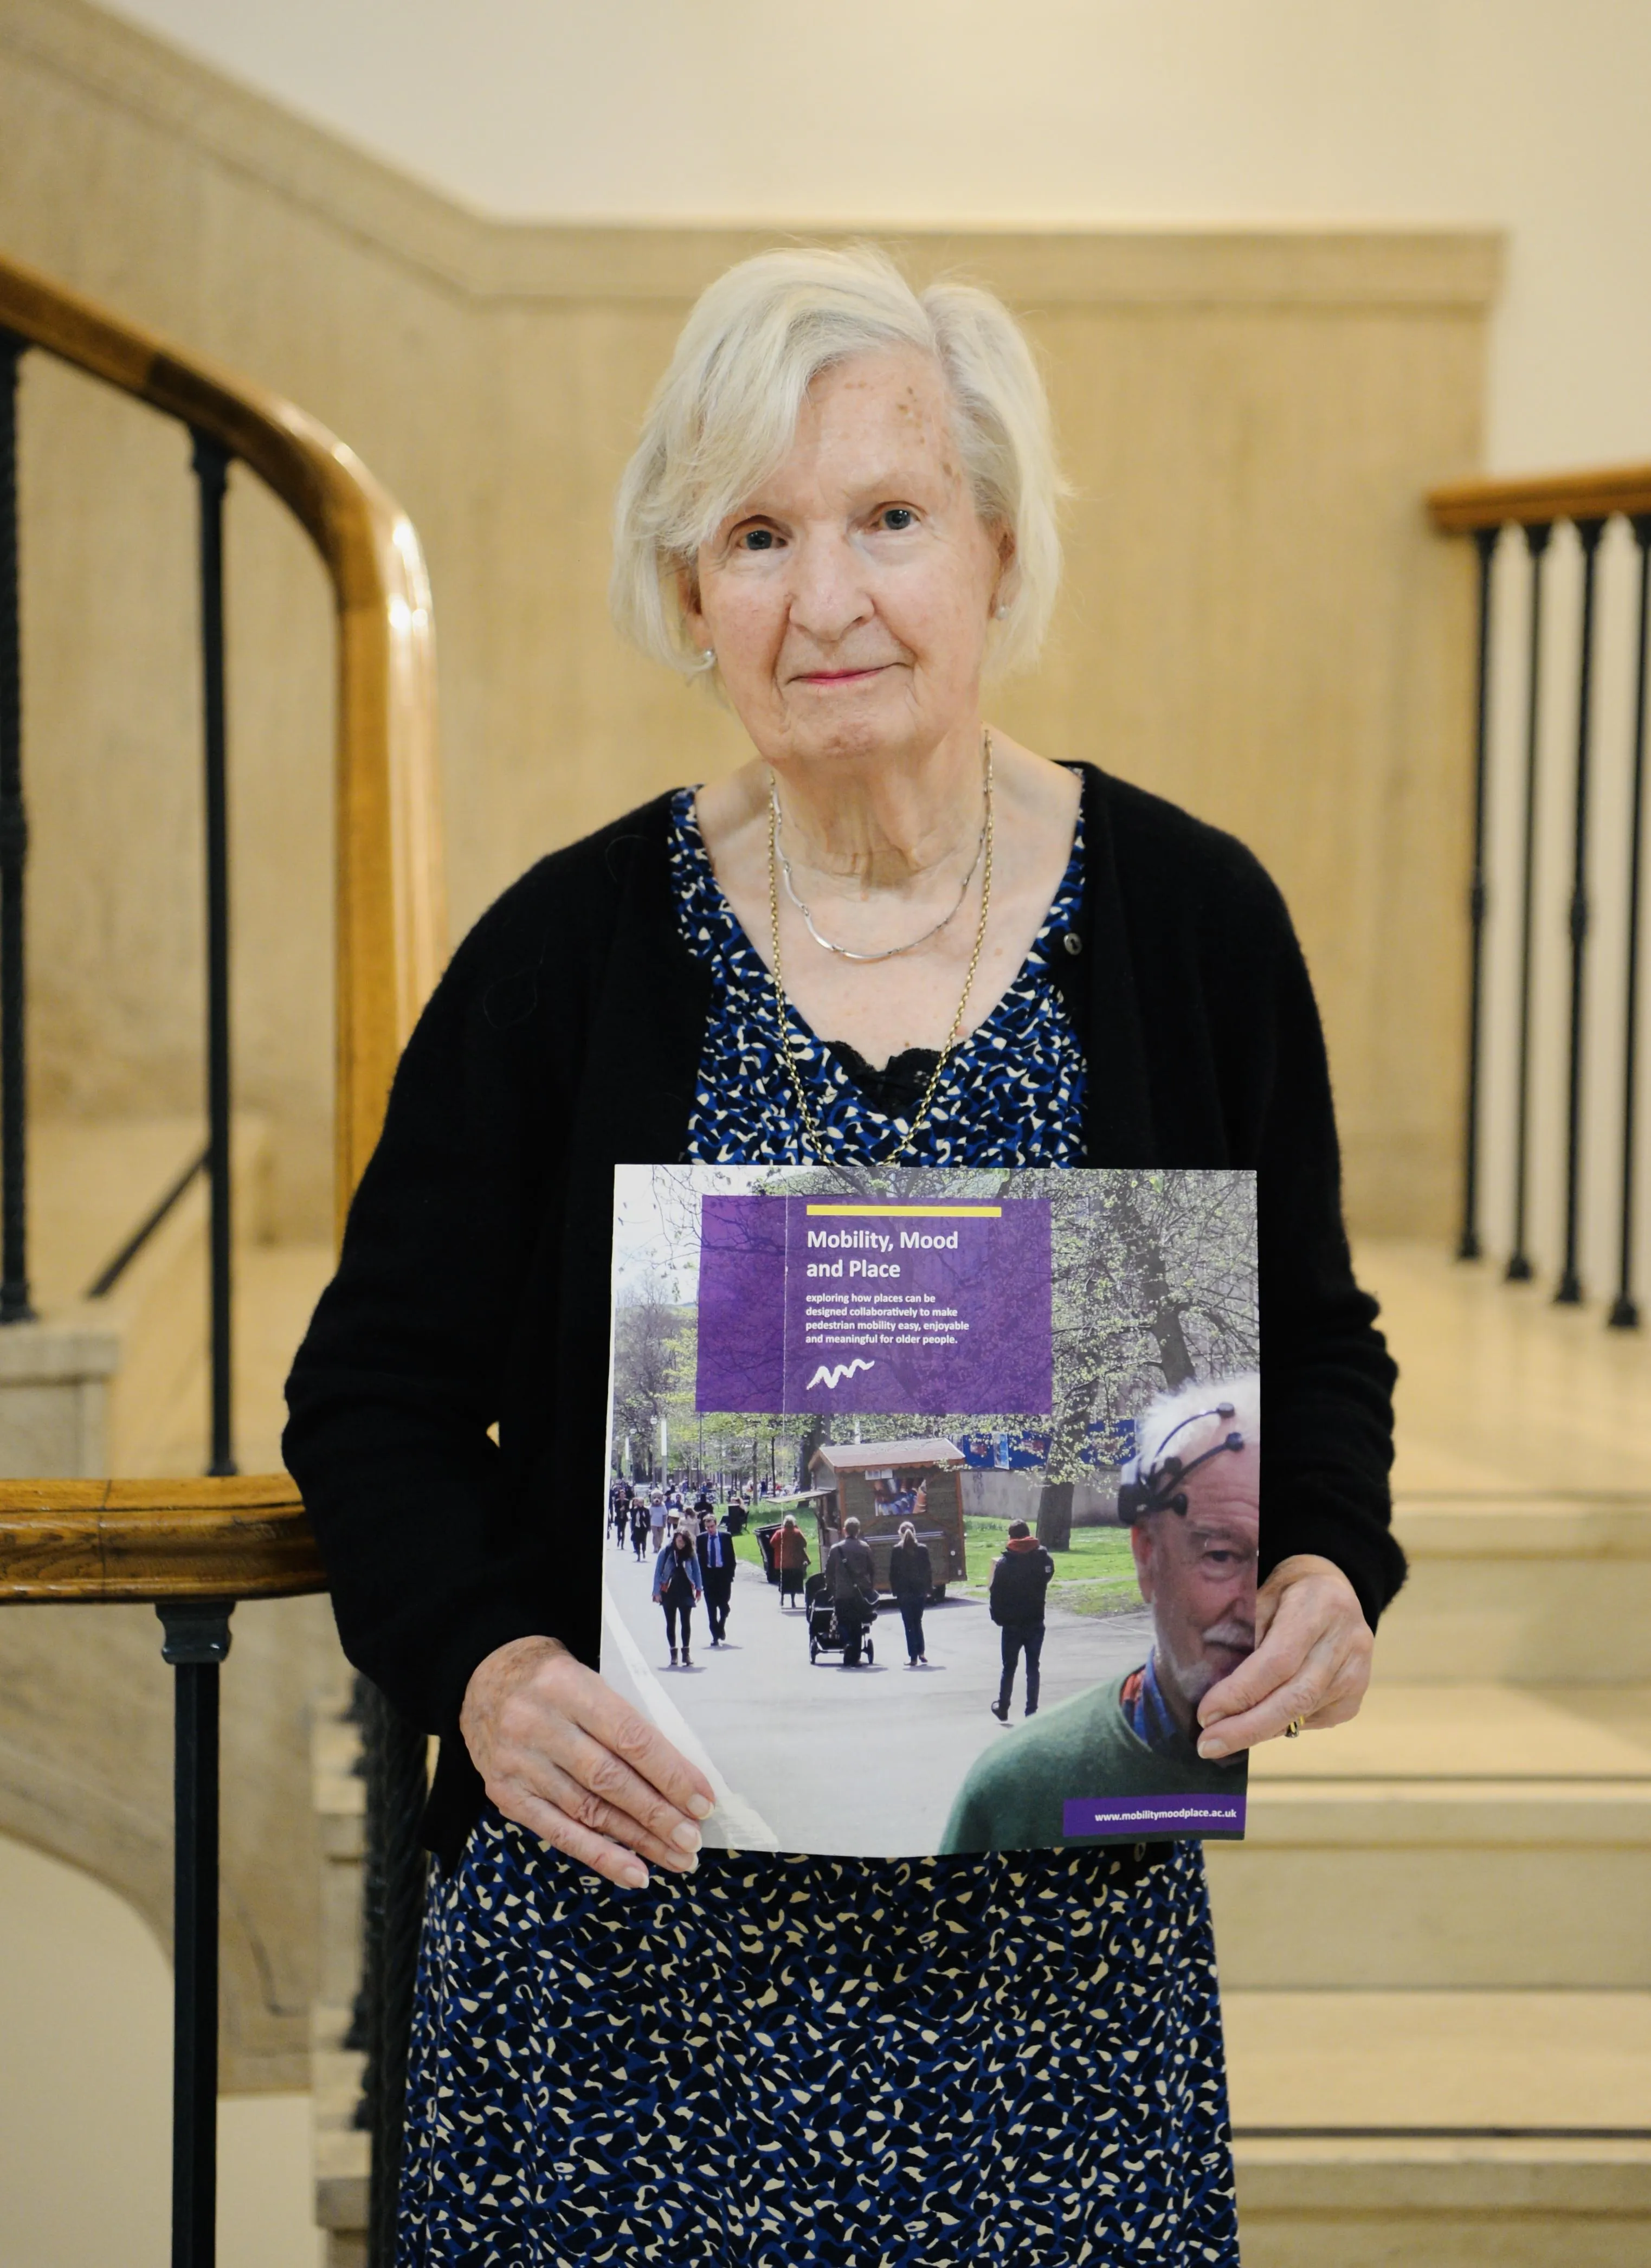 Anthea Tinker holding a copy of the Mobility, mood and place leaflet